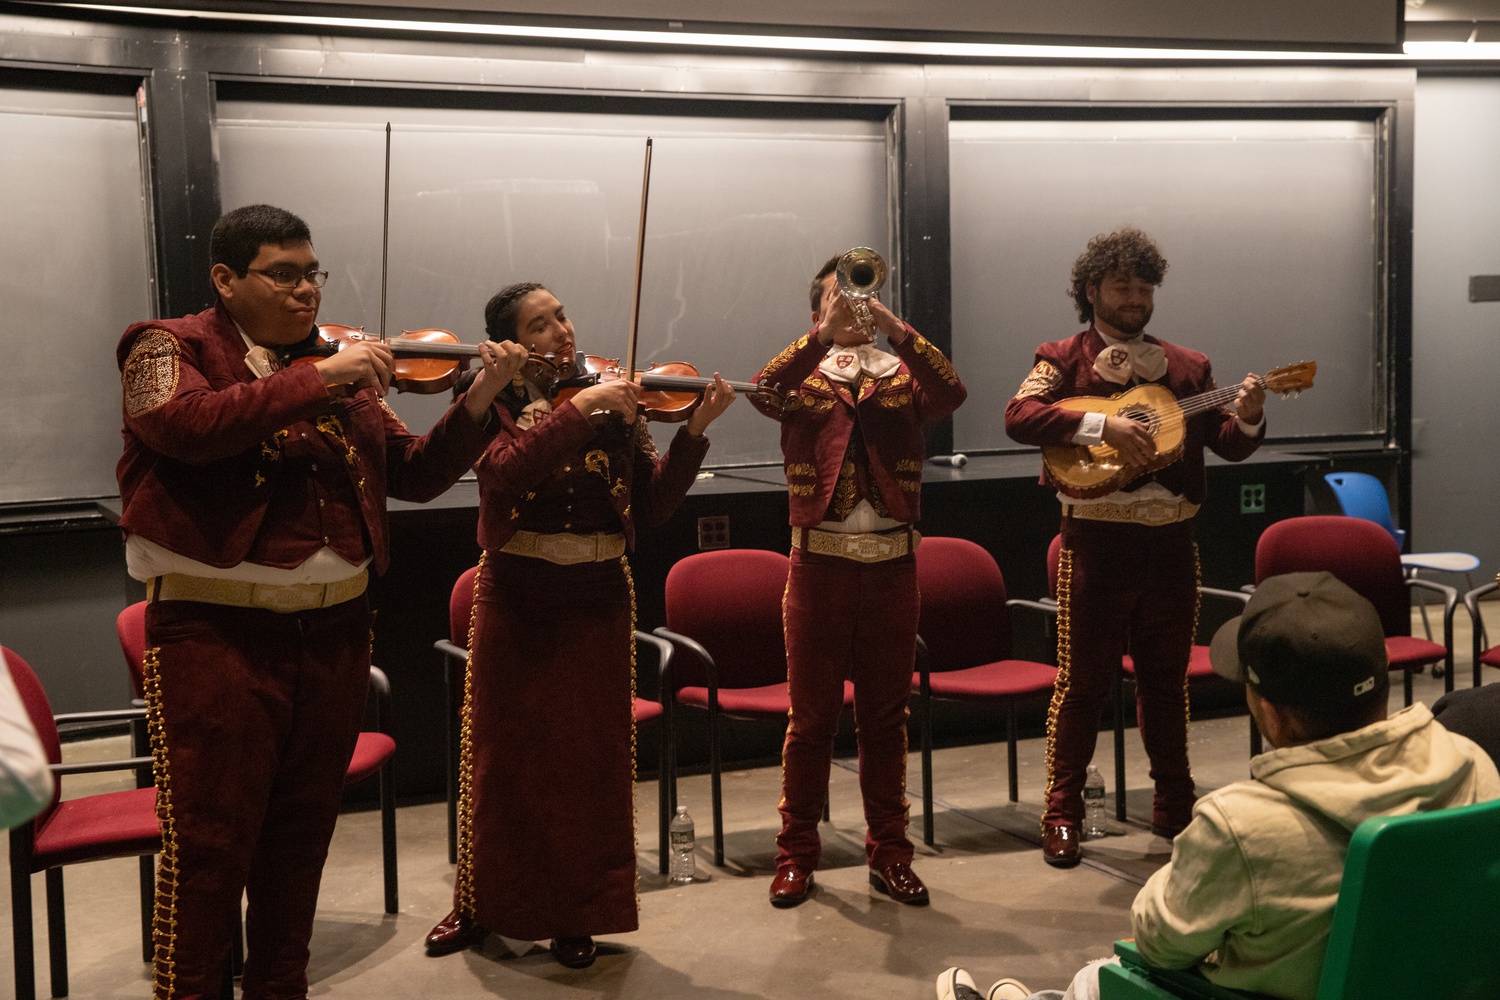 Harvard Mariachi Véritas performs for Grupo Frontera, a Mexican band from the Rio Grande Valley in Texas that came to campus during Hispanic Heritage Month.